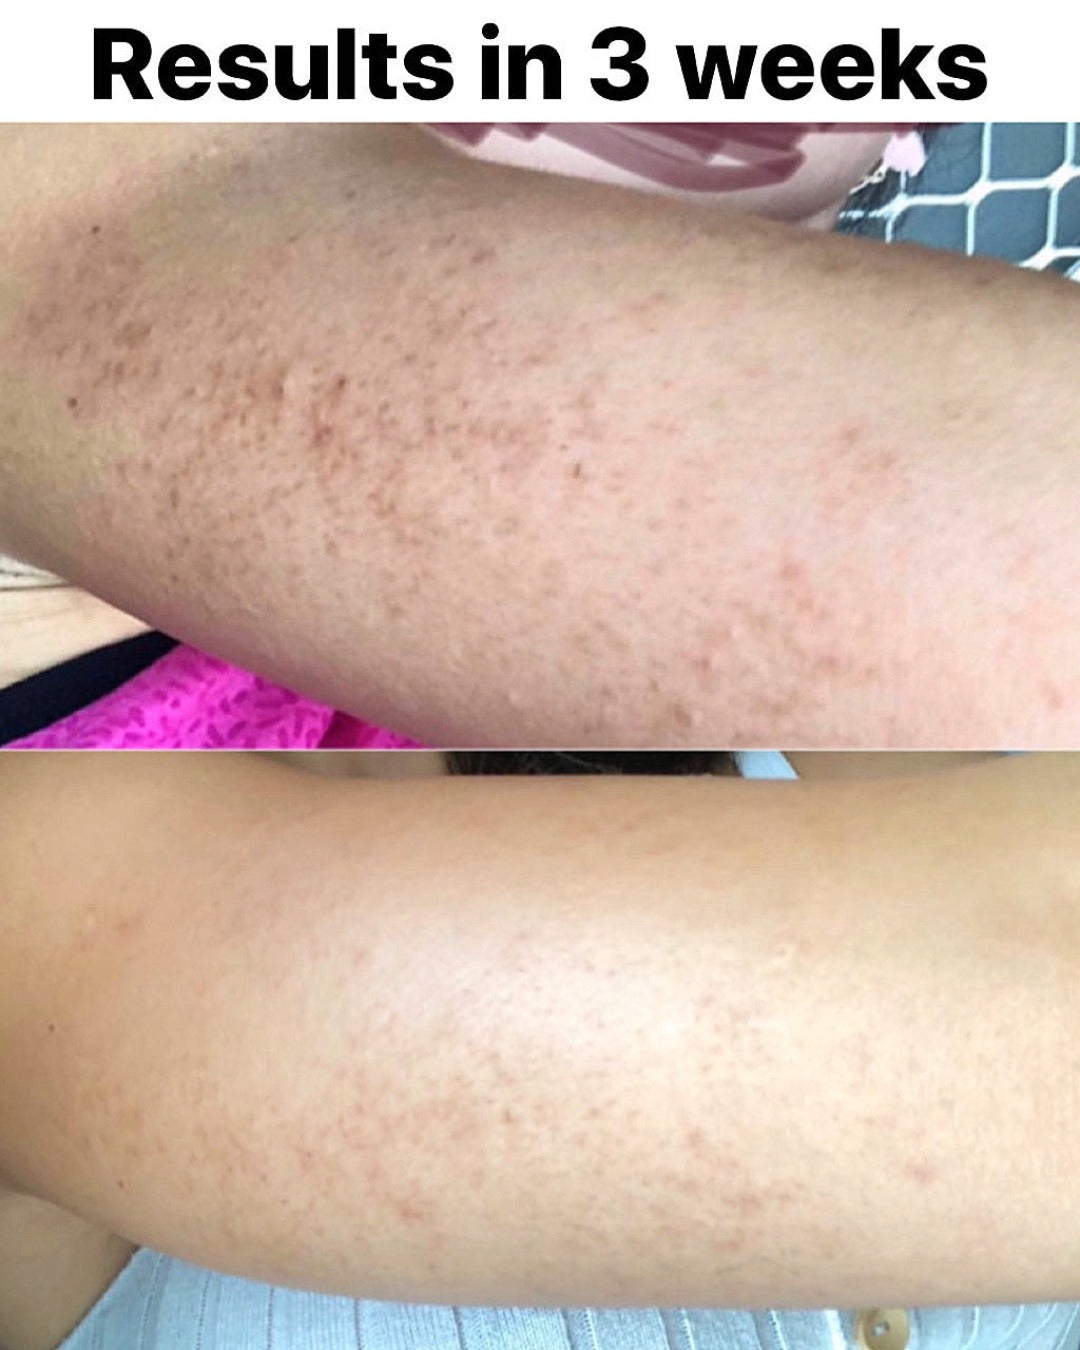 Evident Progress in 3 Weeks: Results from using Tribe Smoothing Body Moisturizer, showcased on Spa Circle Brands' product listing